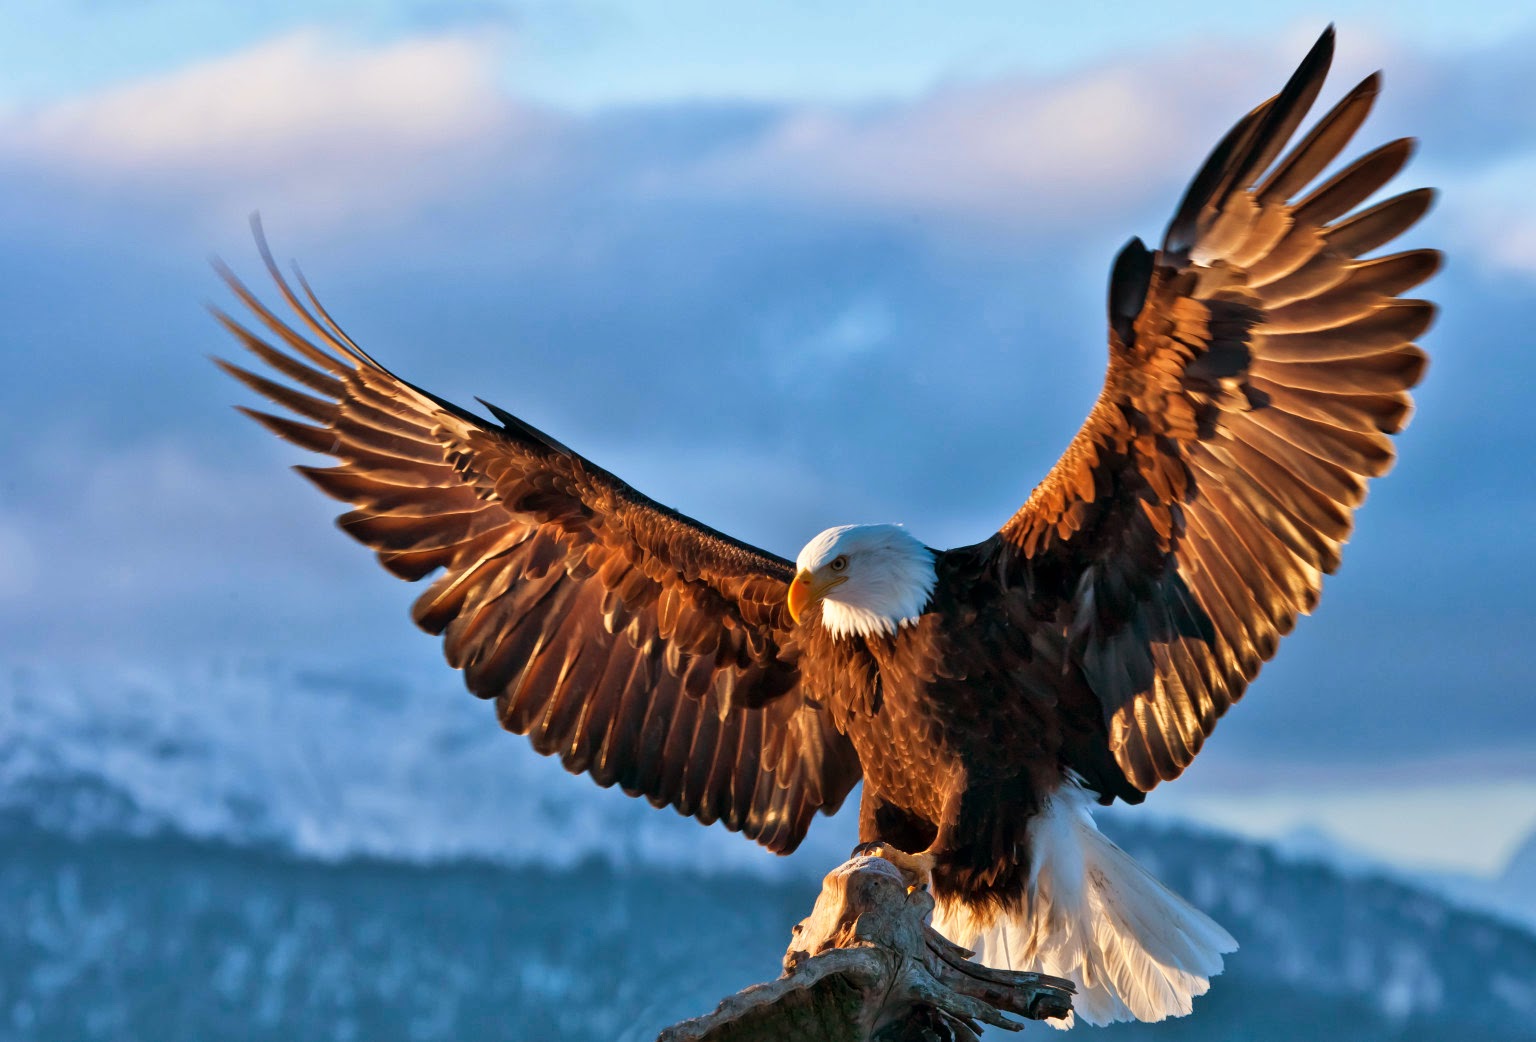 How do you download free photos of eagles?